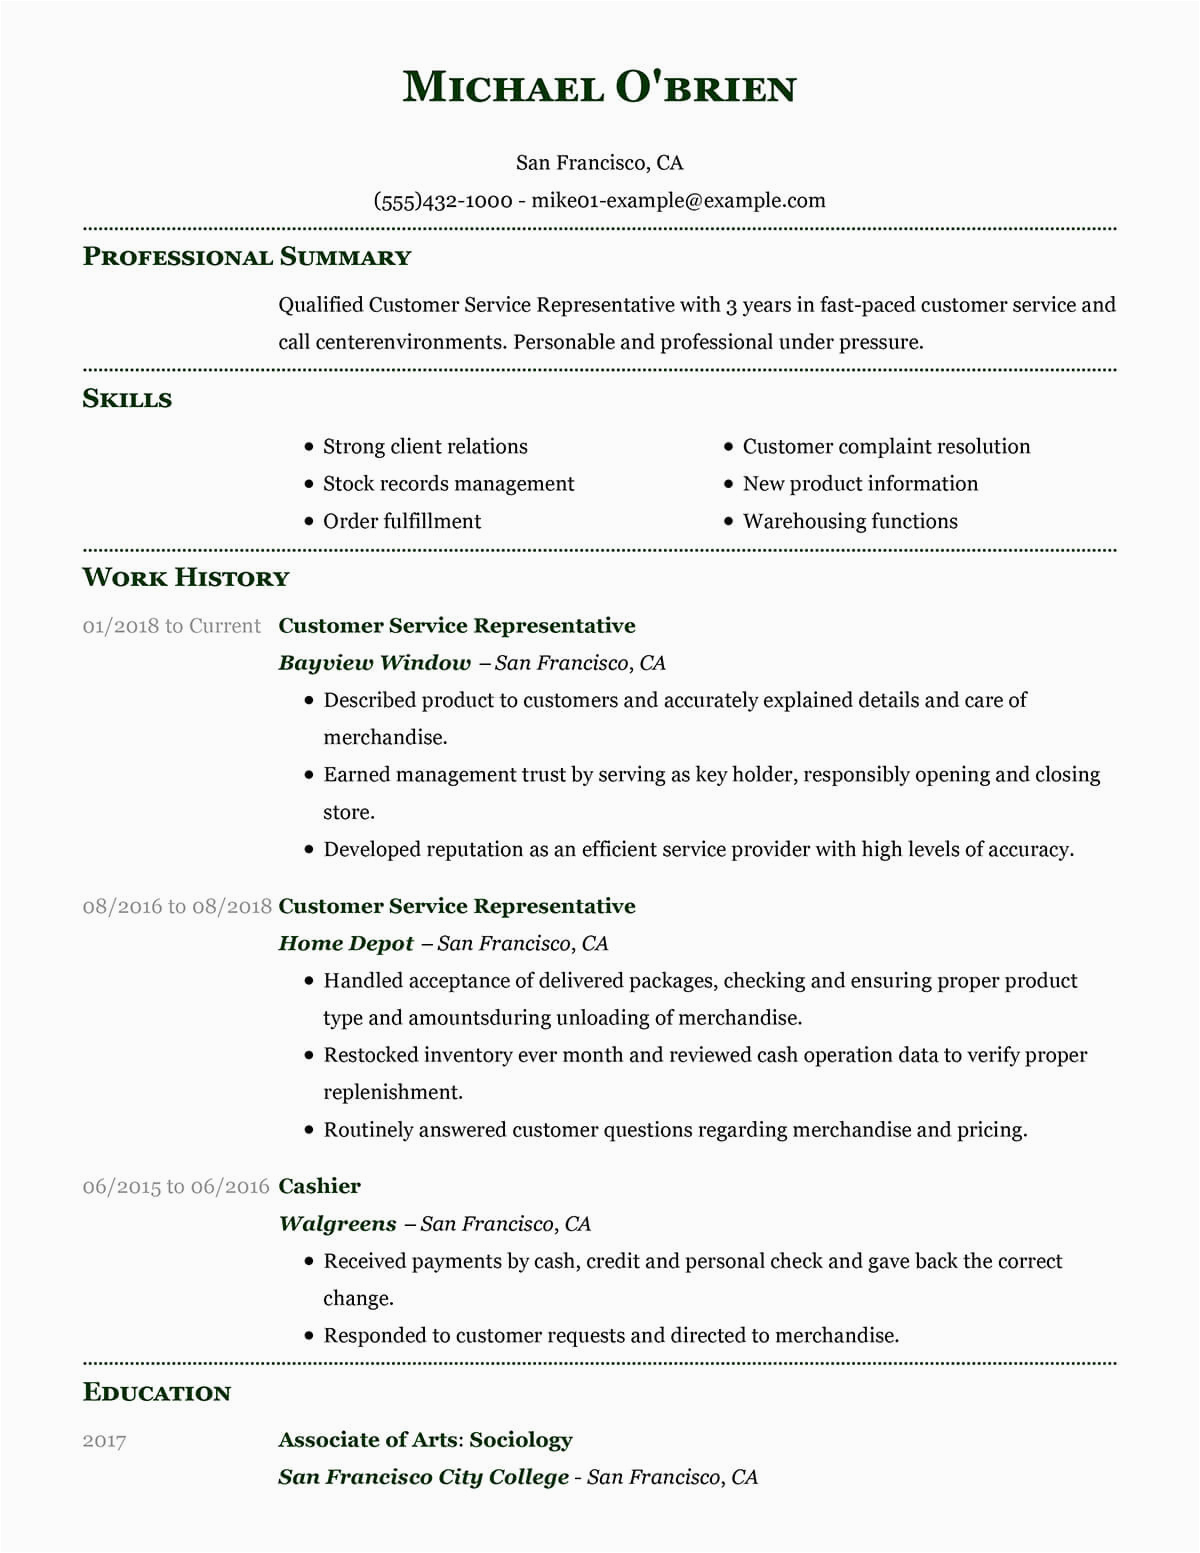 Sample Resume for Customer Service Representative with Experience Customize Our 1 Customer Representative Resume Example